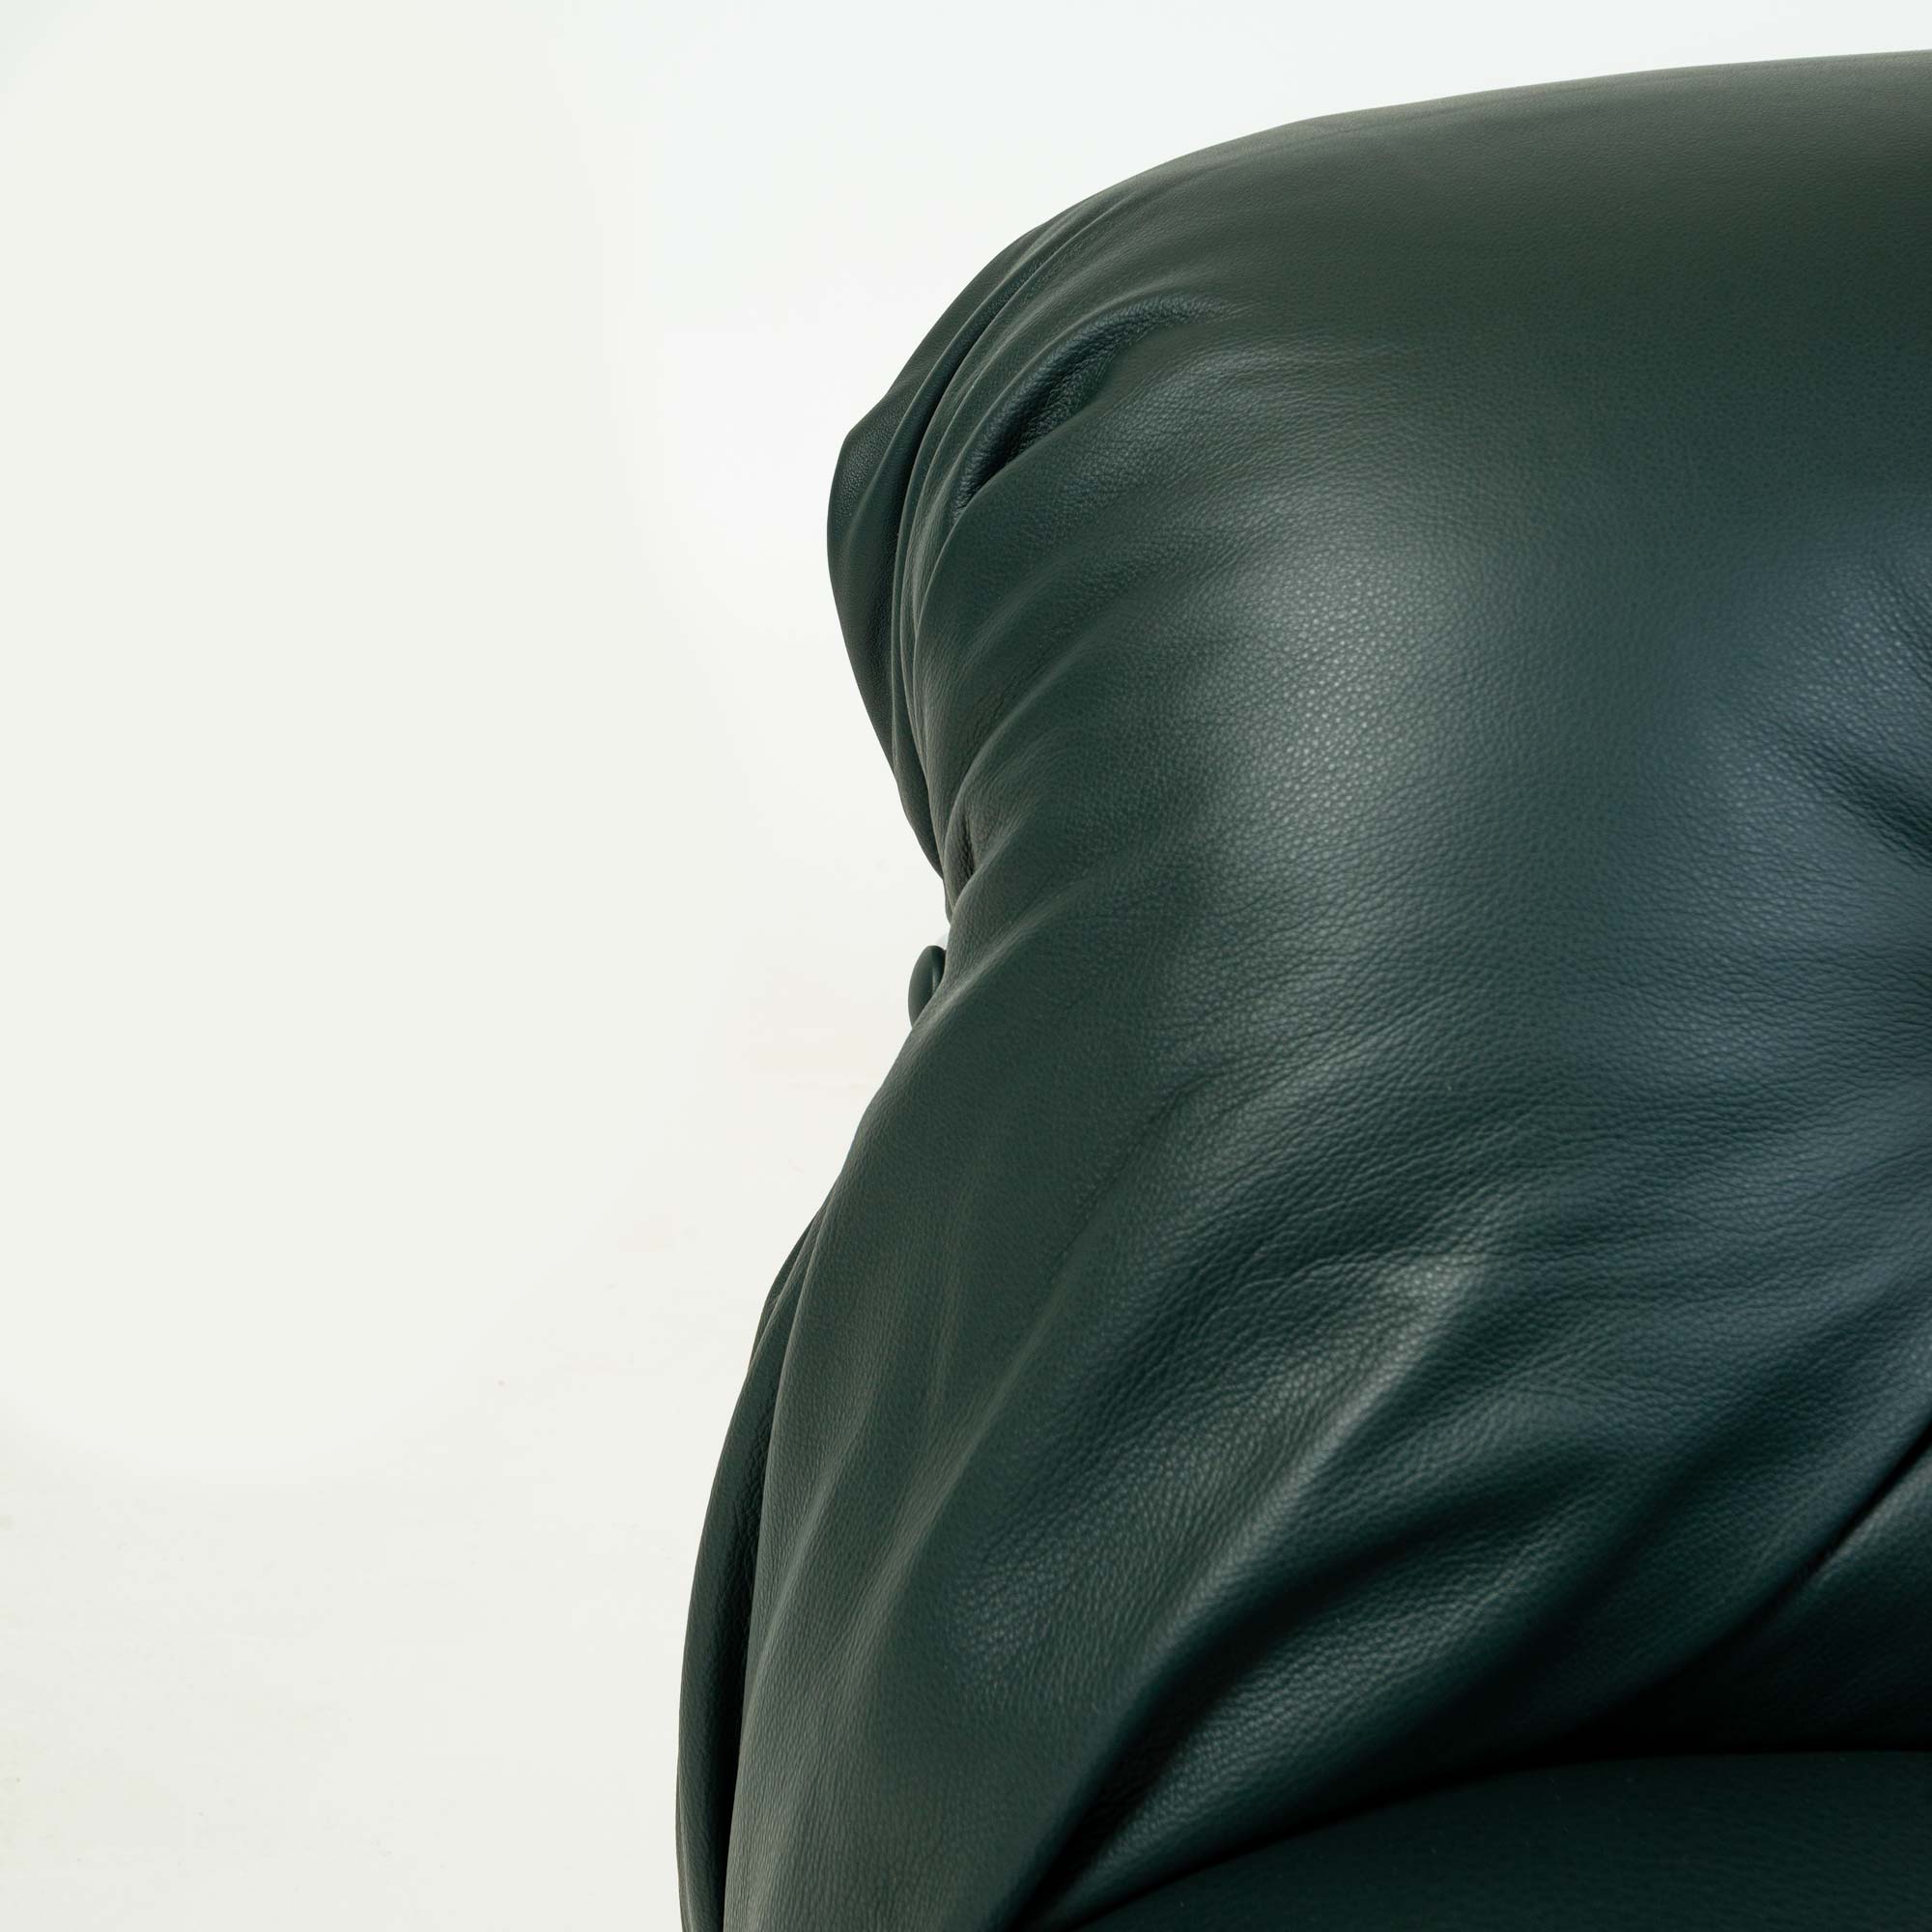 Soriana Lounge Chair by Afra & Tobia Scarpa for Cassina 1970s in Elmo Green Leather